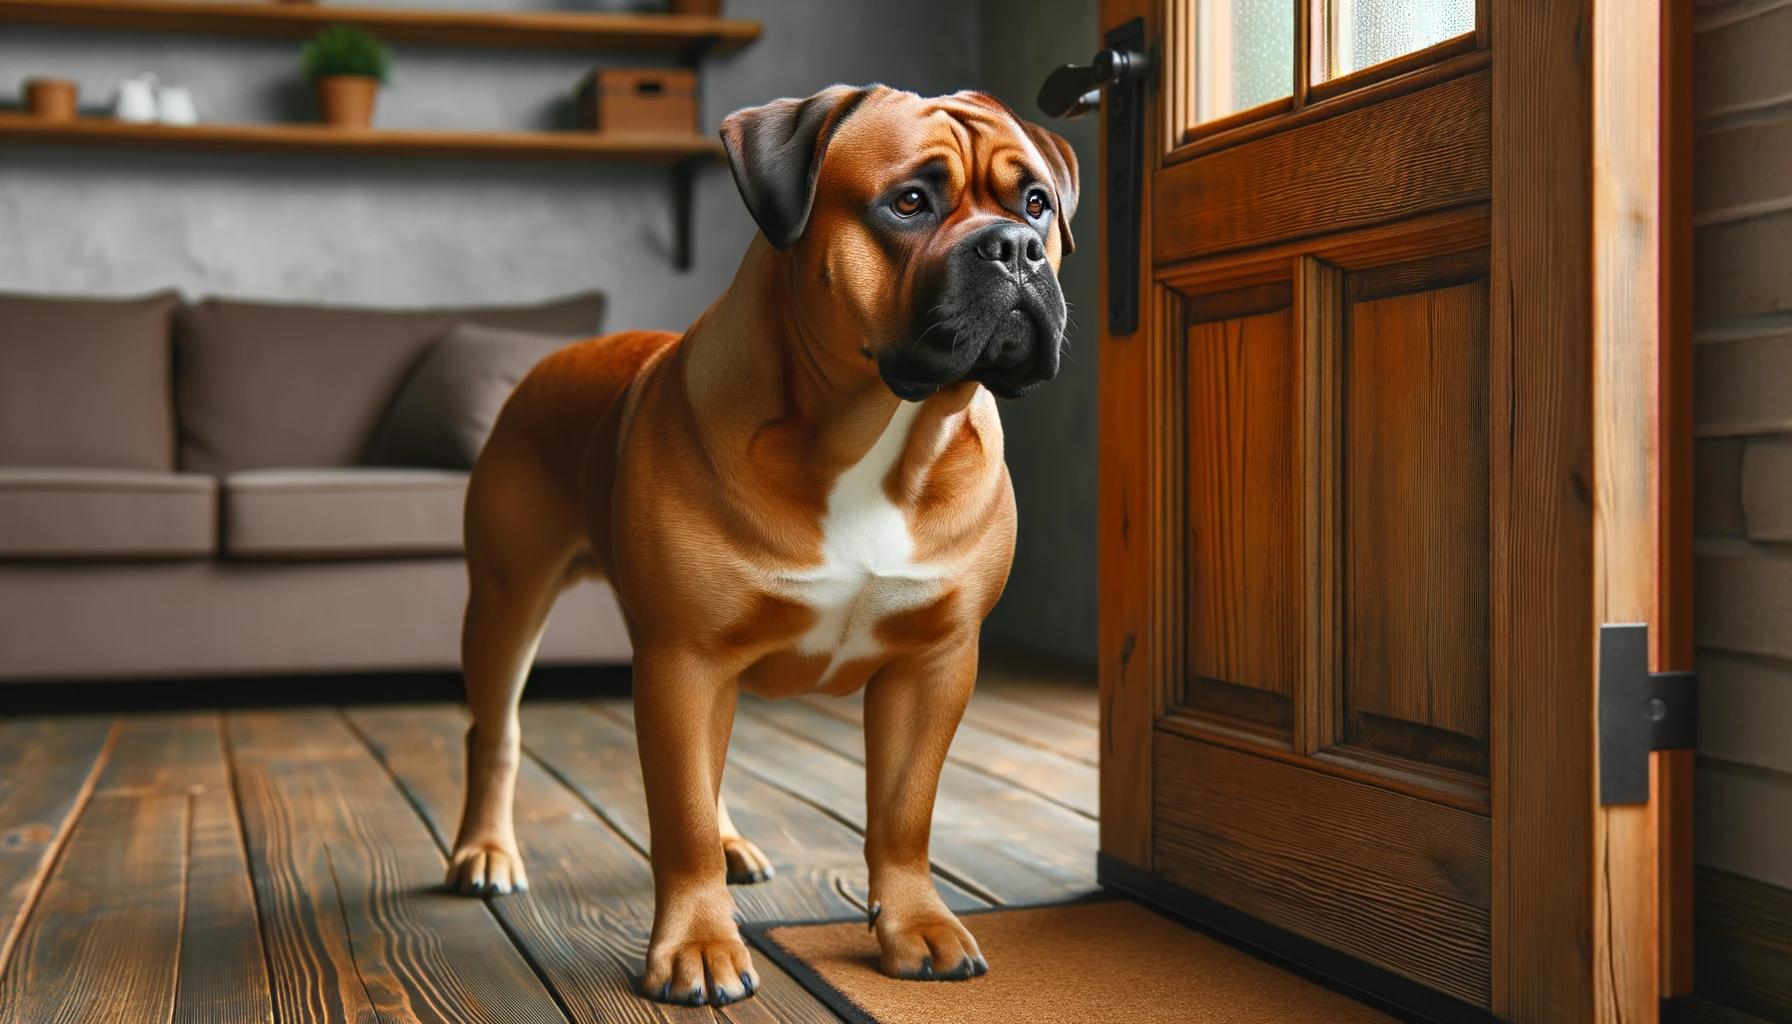 Photo of a vigilant Bullador dog standing guard at a wooden front door. The dog's posture is upright, ears alert, and eyes keenly observing the surroundings, showcasing its unexpected watchdog abilities.